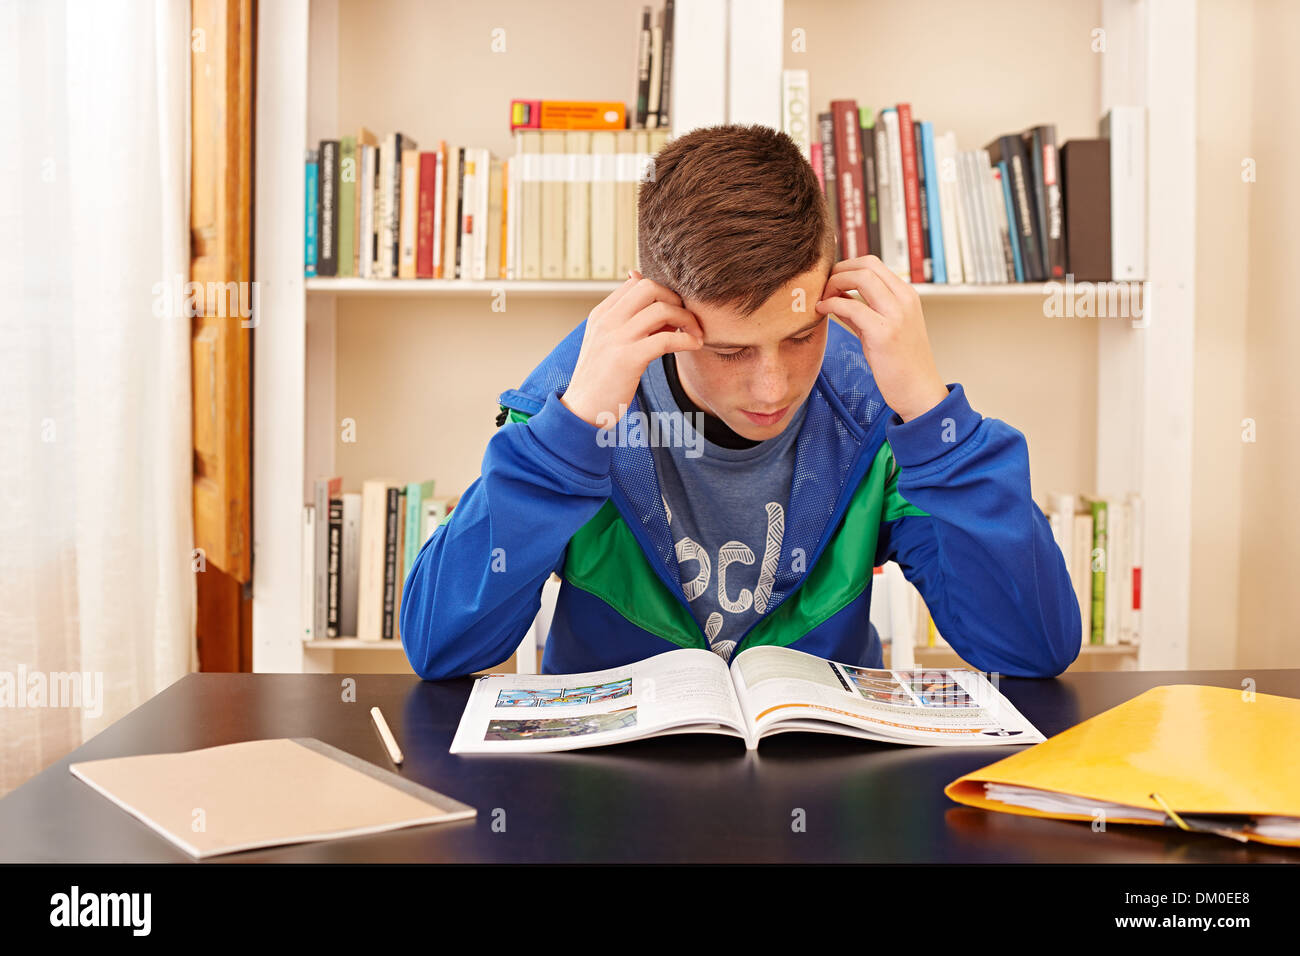 Male teenager concentrated studying in a desk Stock Photo